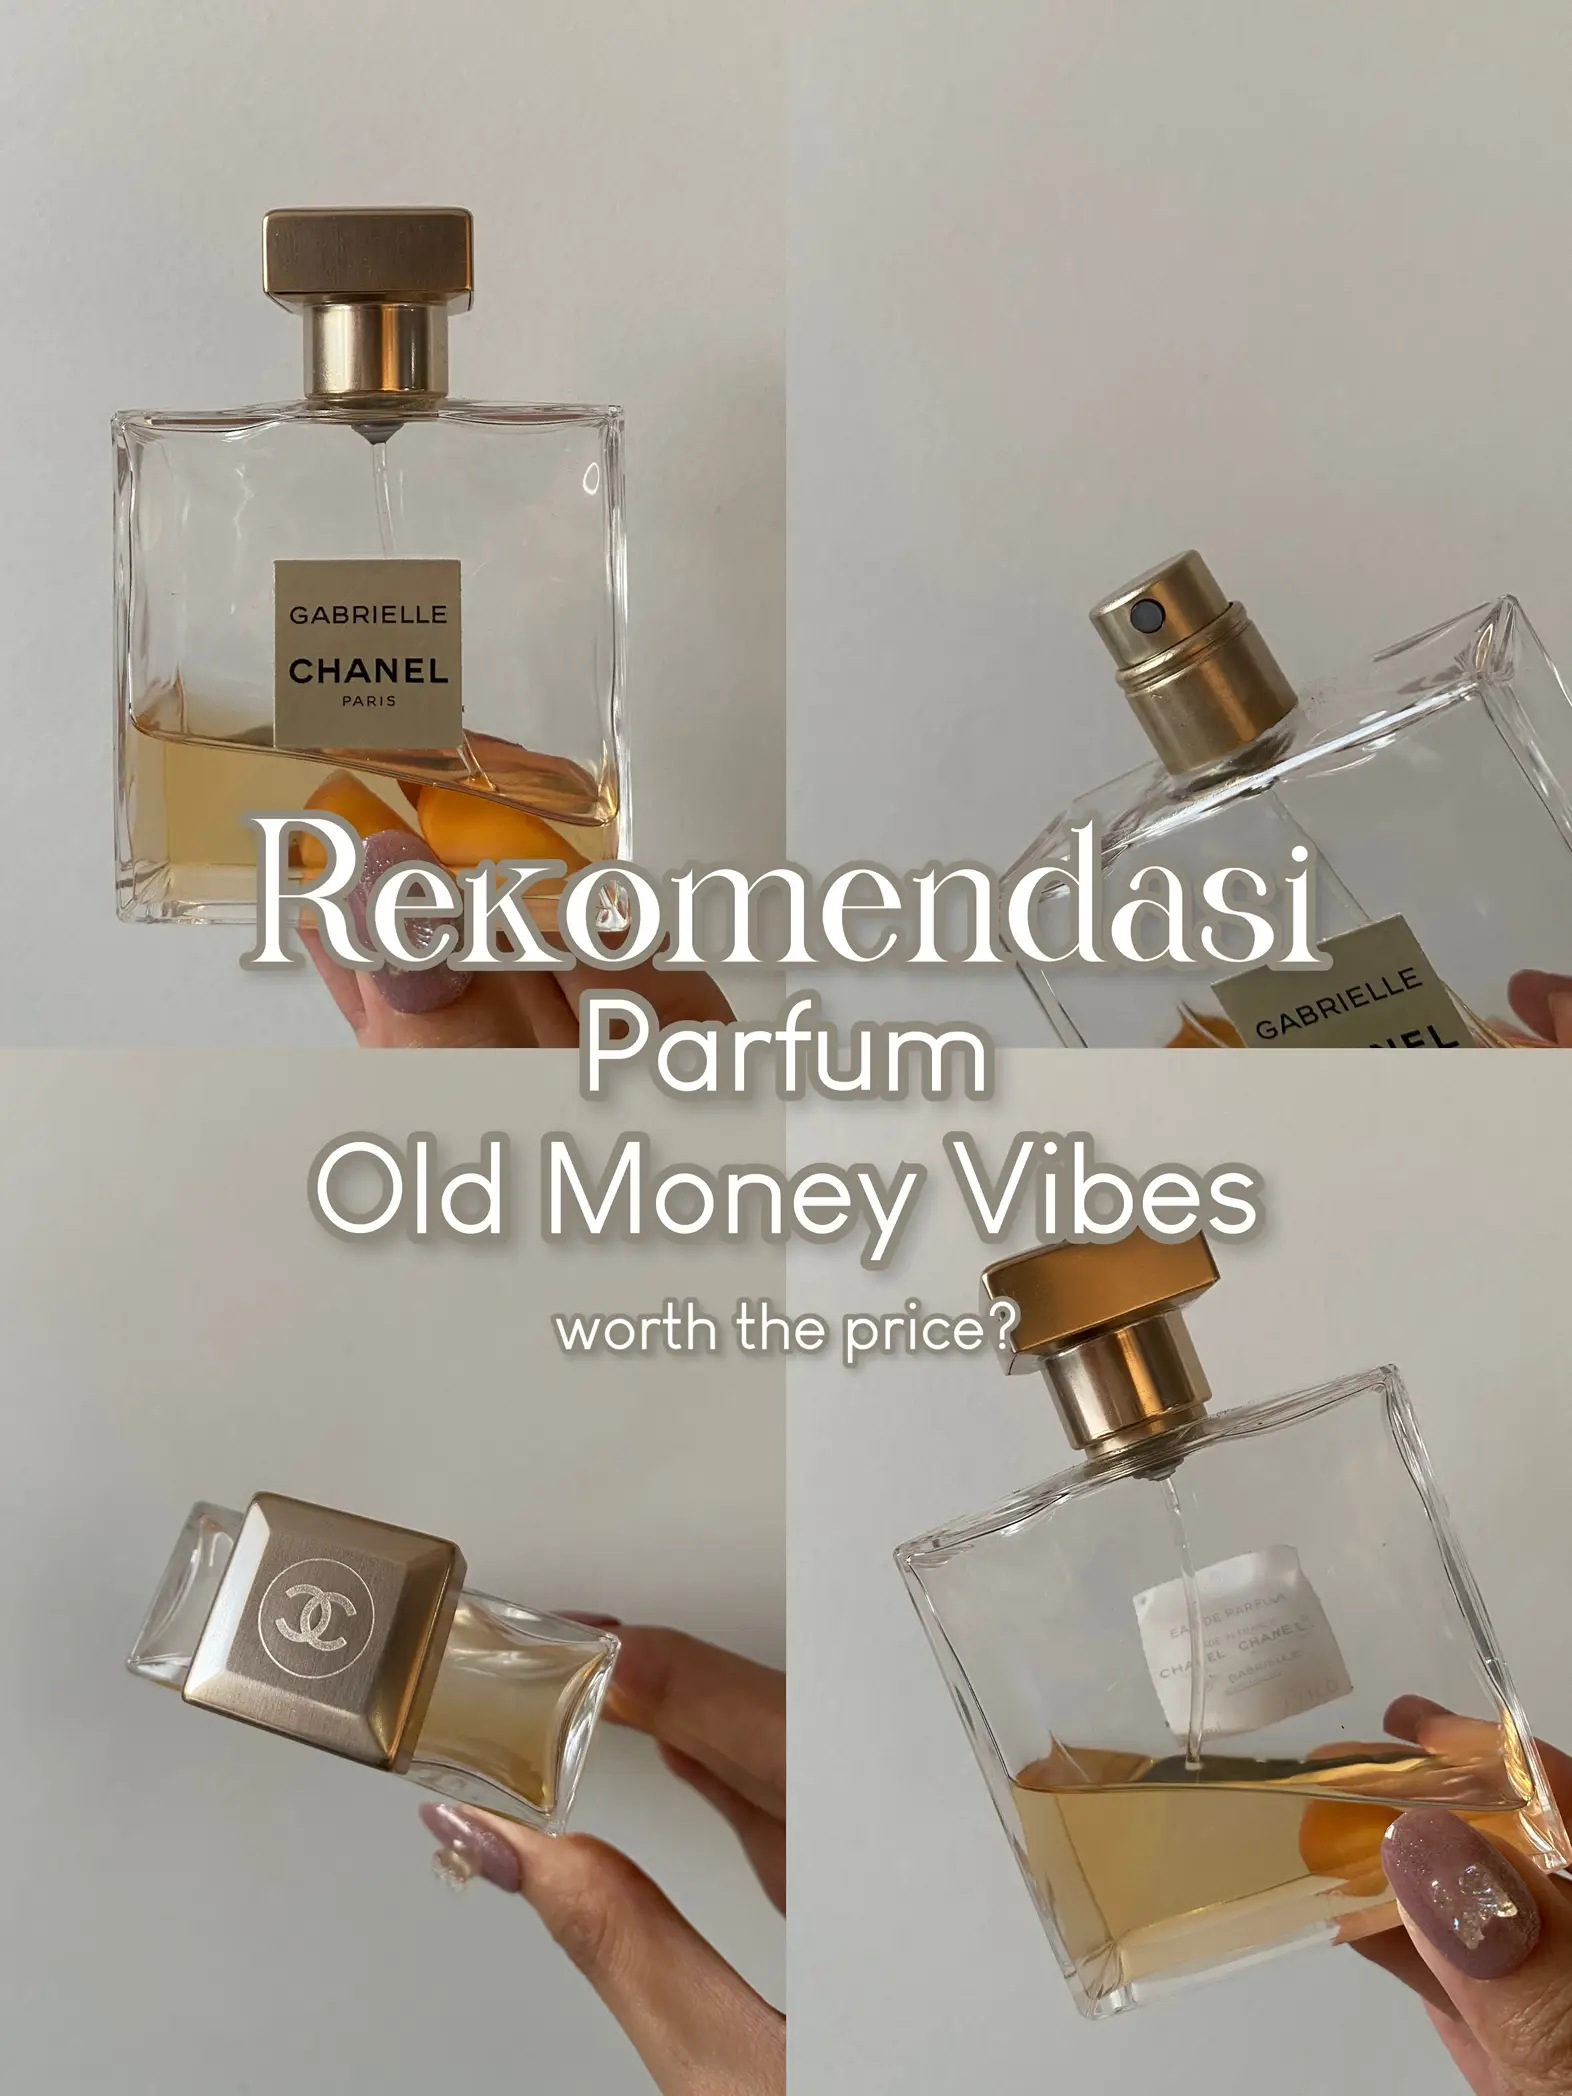 SAVE] Rekomendasi Parfum Old Money Vibes! ⚜️✨, Gallery posted by Putri A.